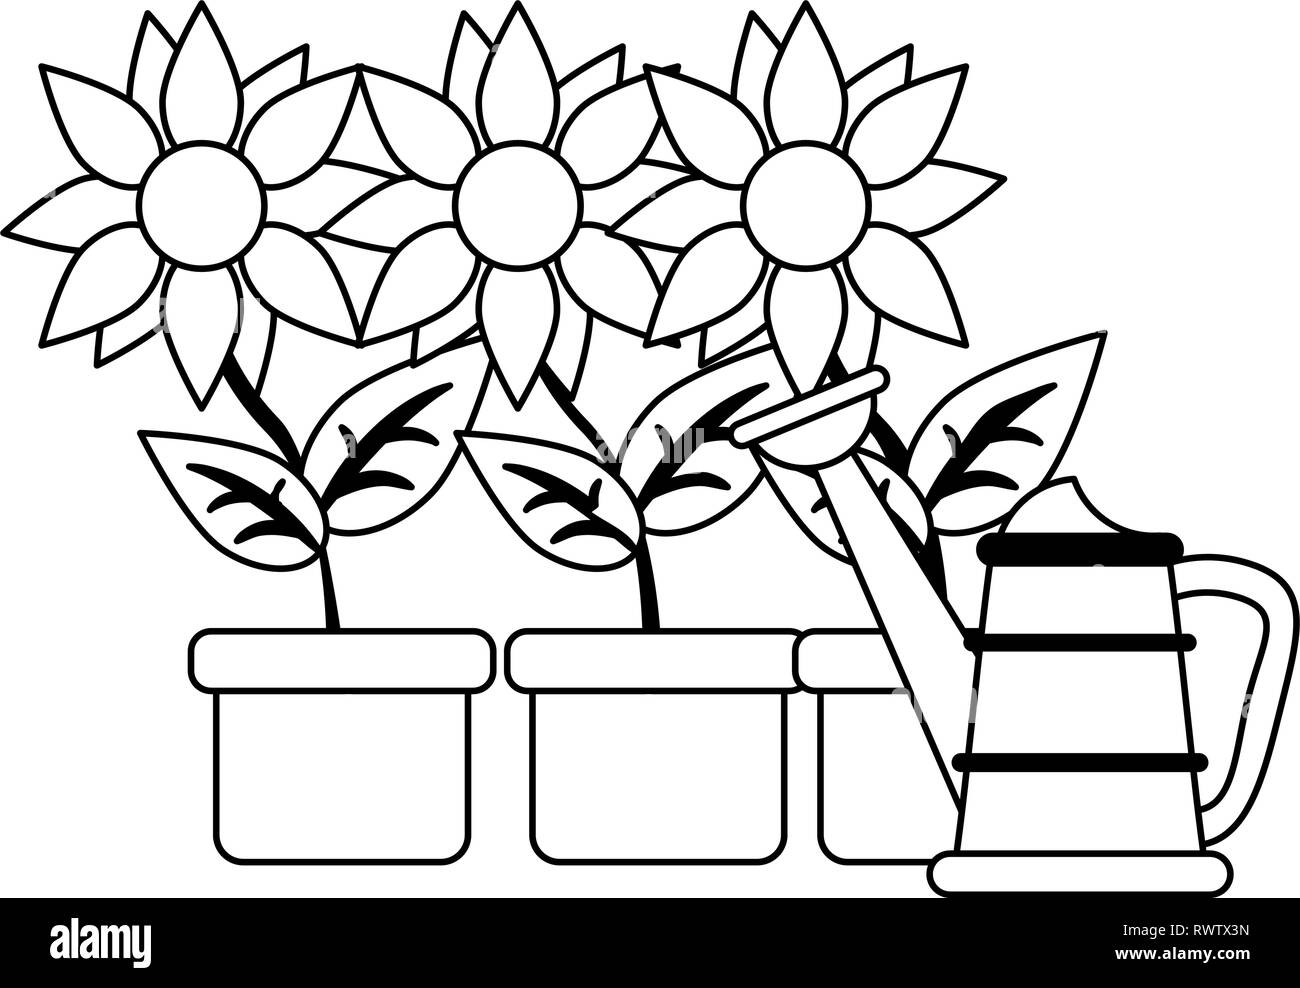 Sunflowers in pots with water can in black and white Stock Vector